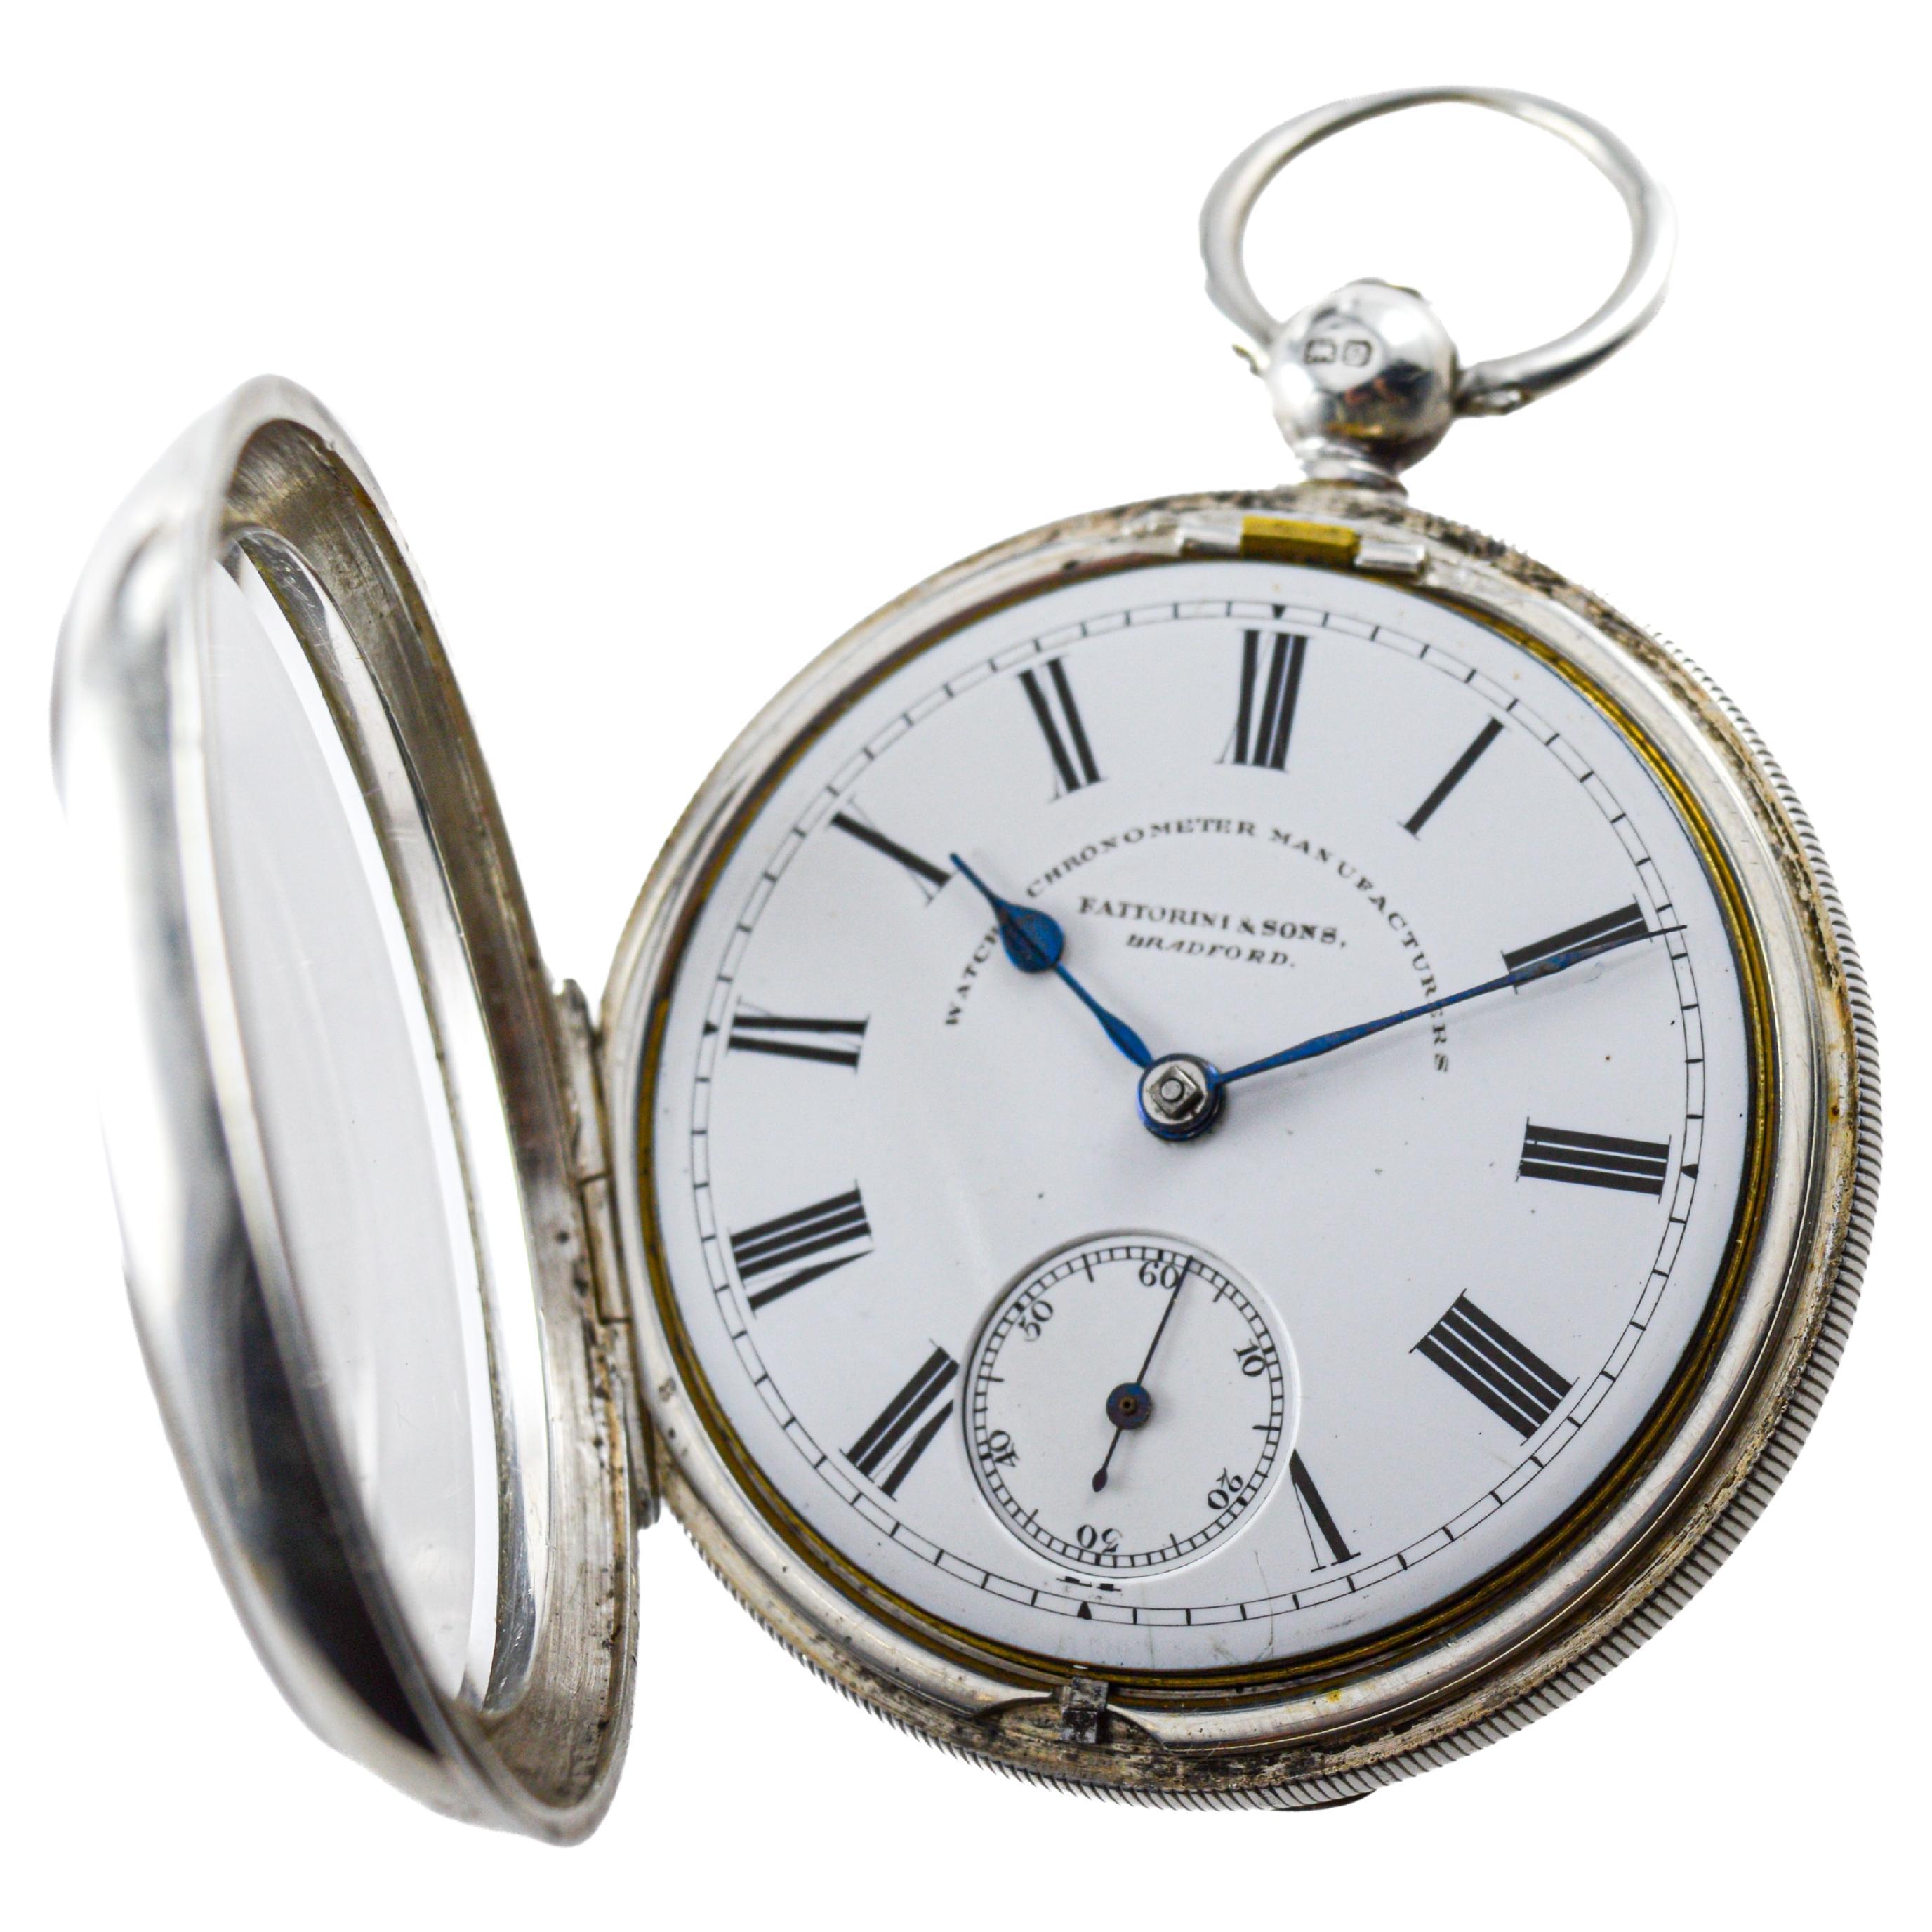 Fattorini & Sons Silver Keywind with Original Kiln Fired Enamel Dial from 1880's For Sale 1